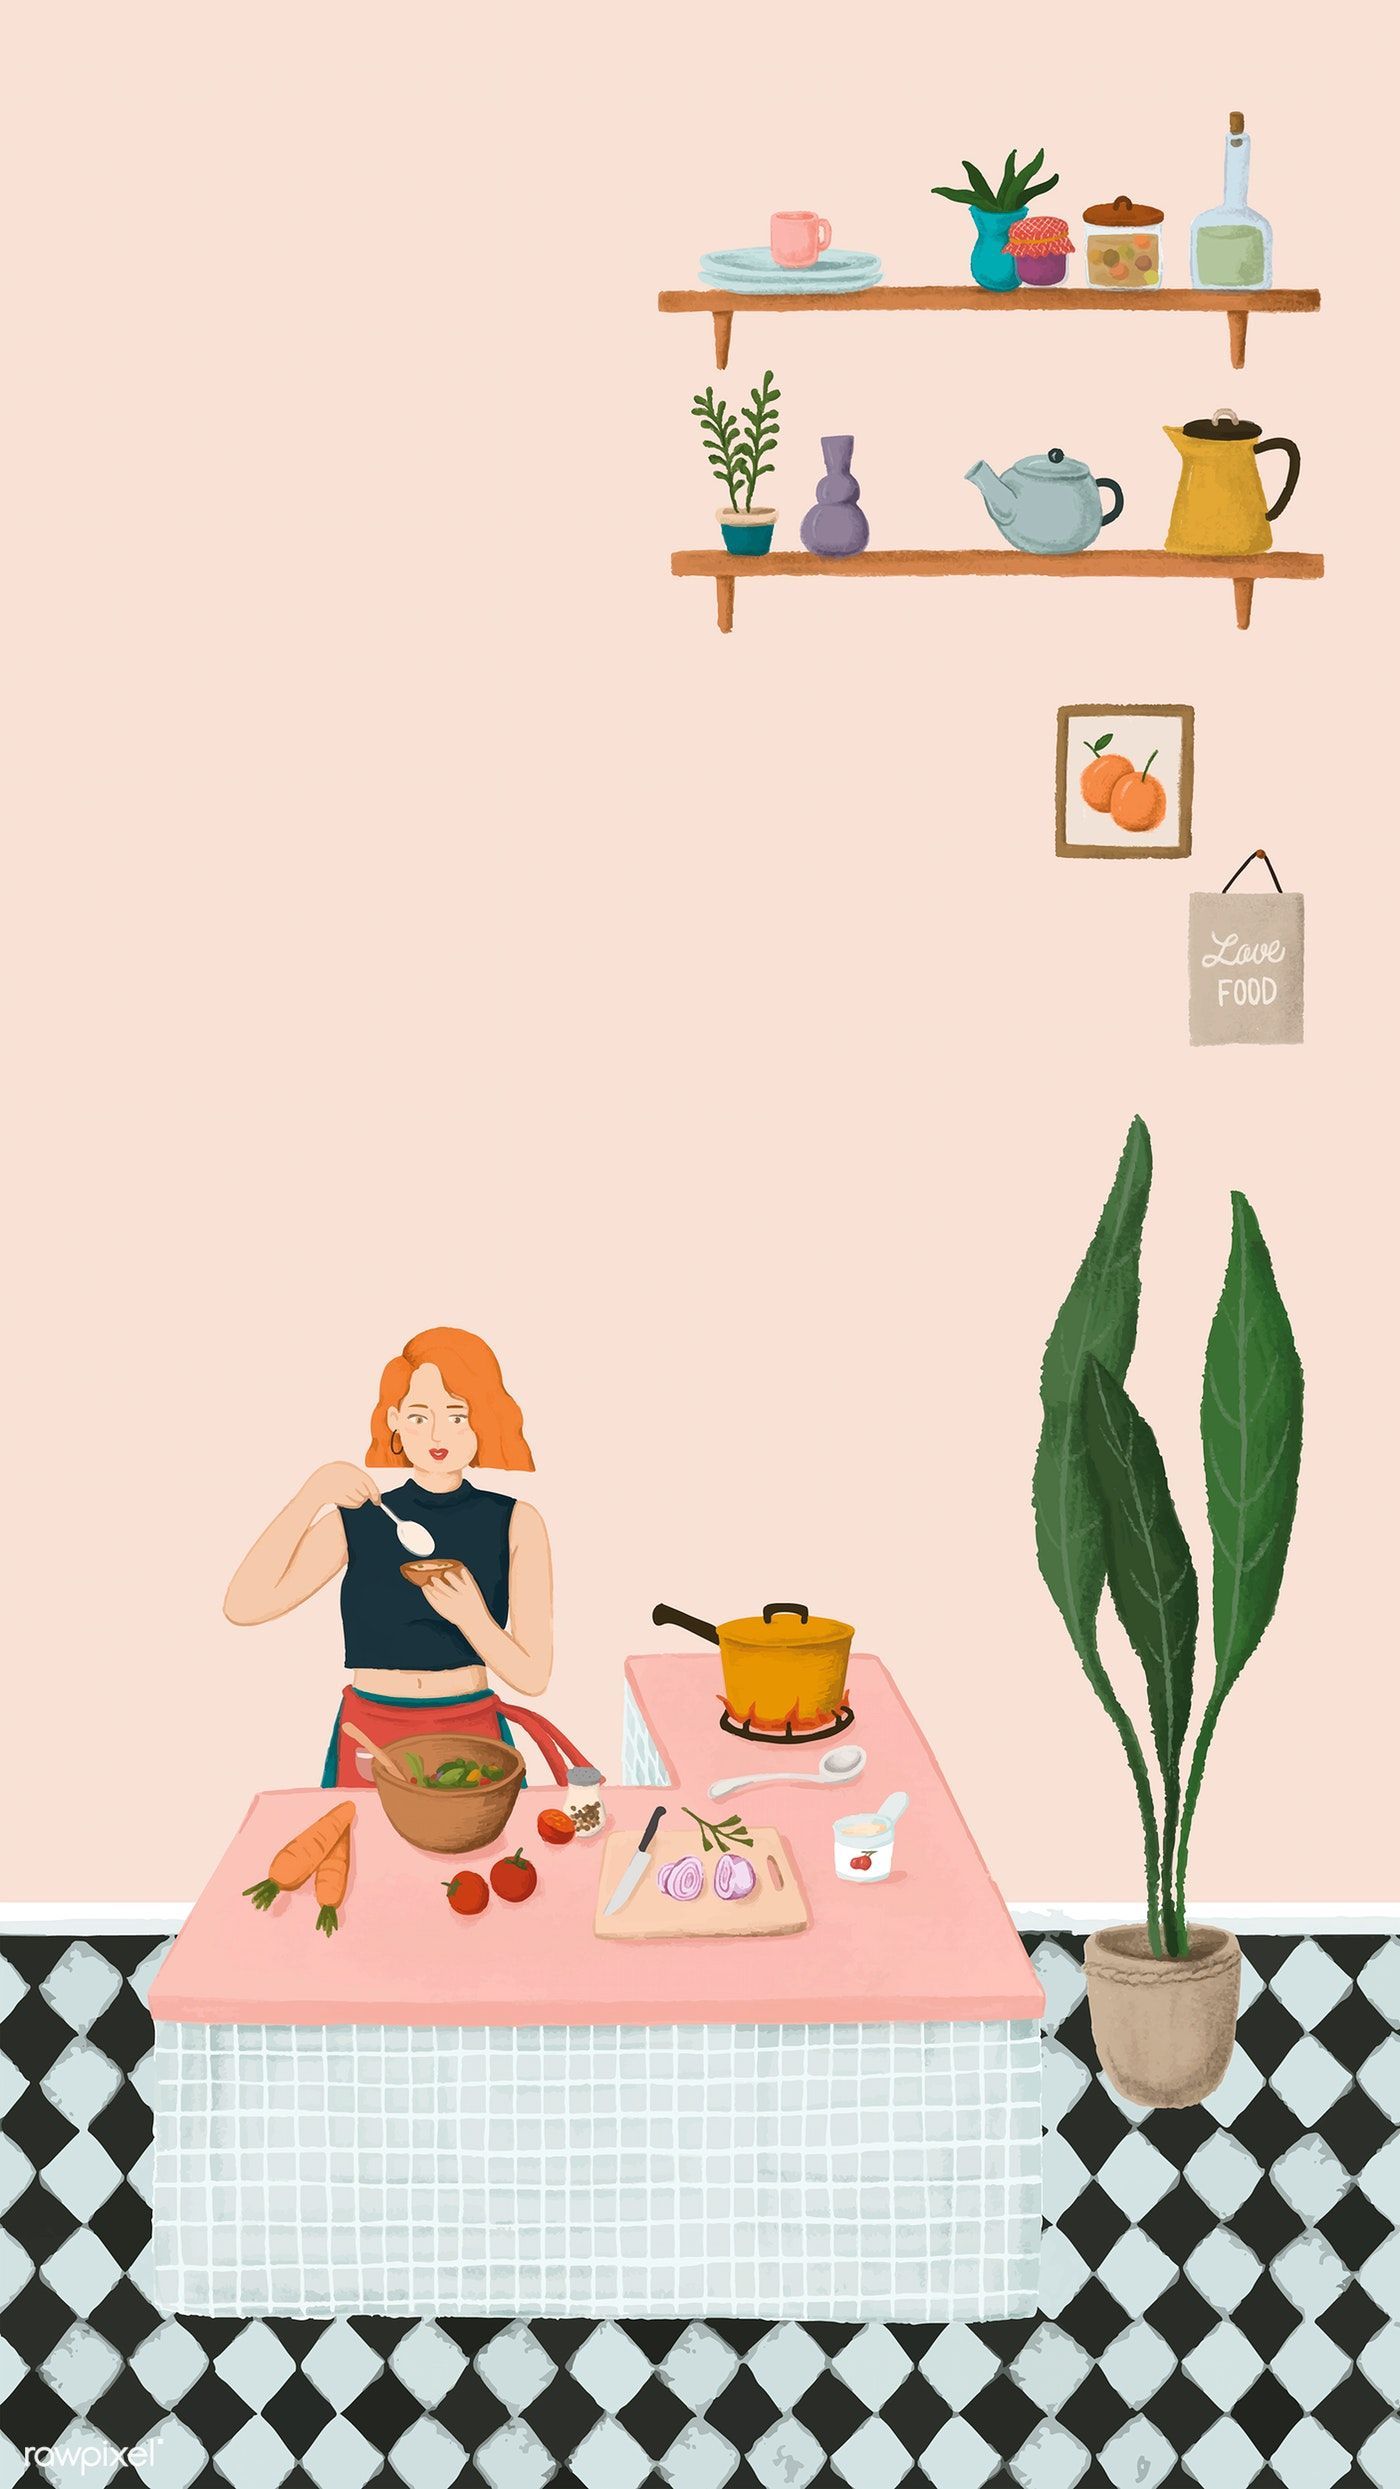 Download premium vector of Girl cooking in a kitchen sketch style mobile. Girl cooking, Cute wallpaper, Watercolor pattern background